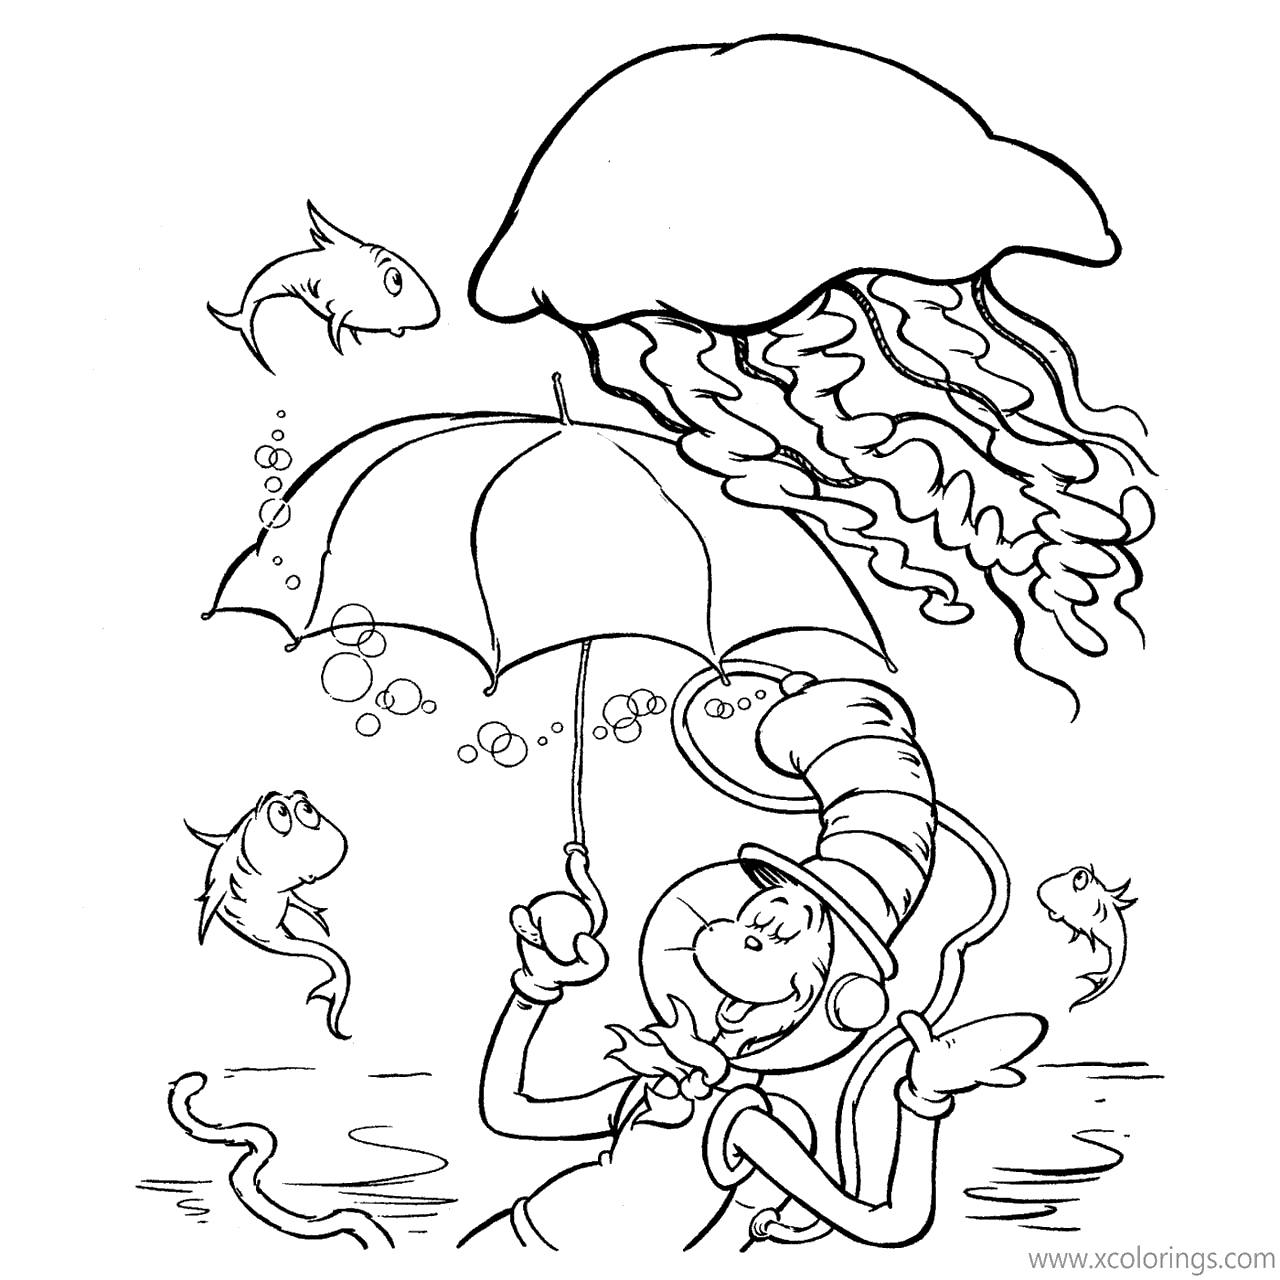 Free Cat In The Hat Coloring Pages Under the Water printable